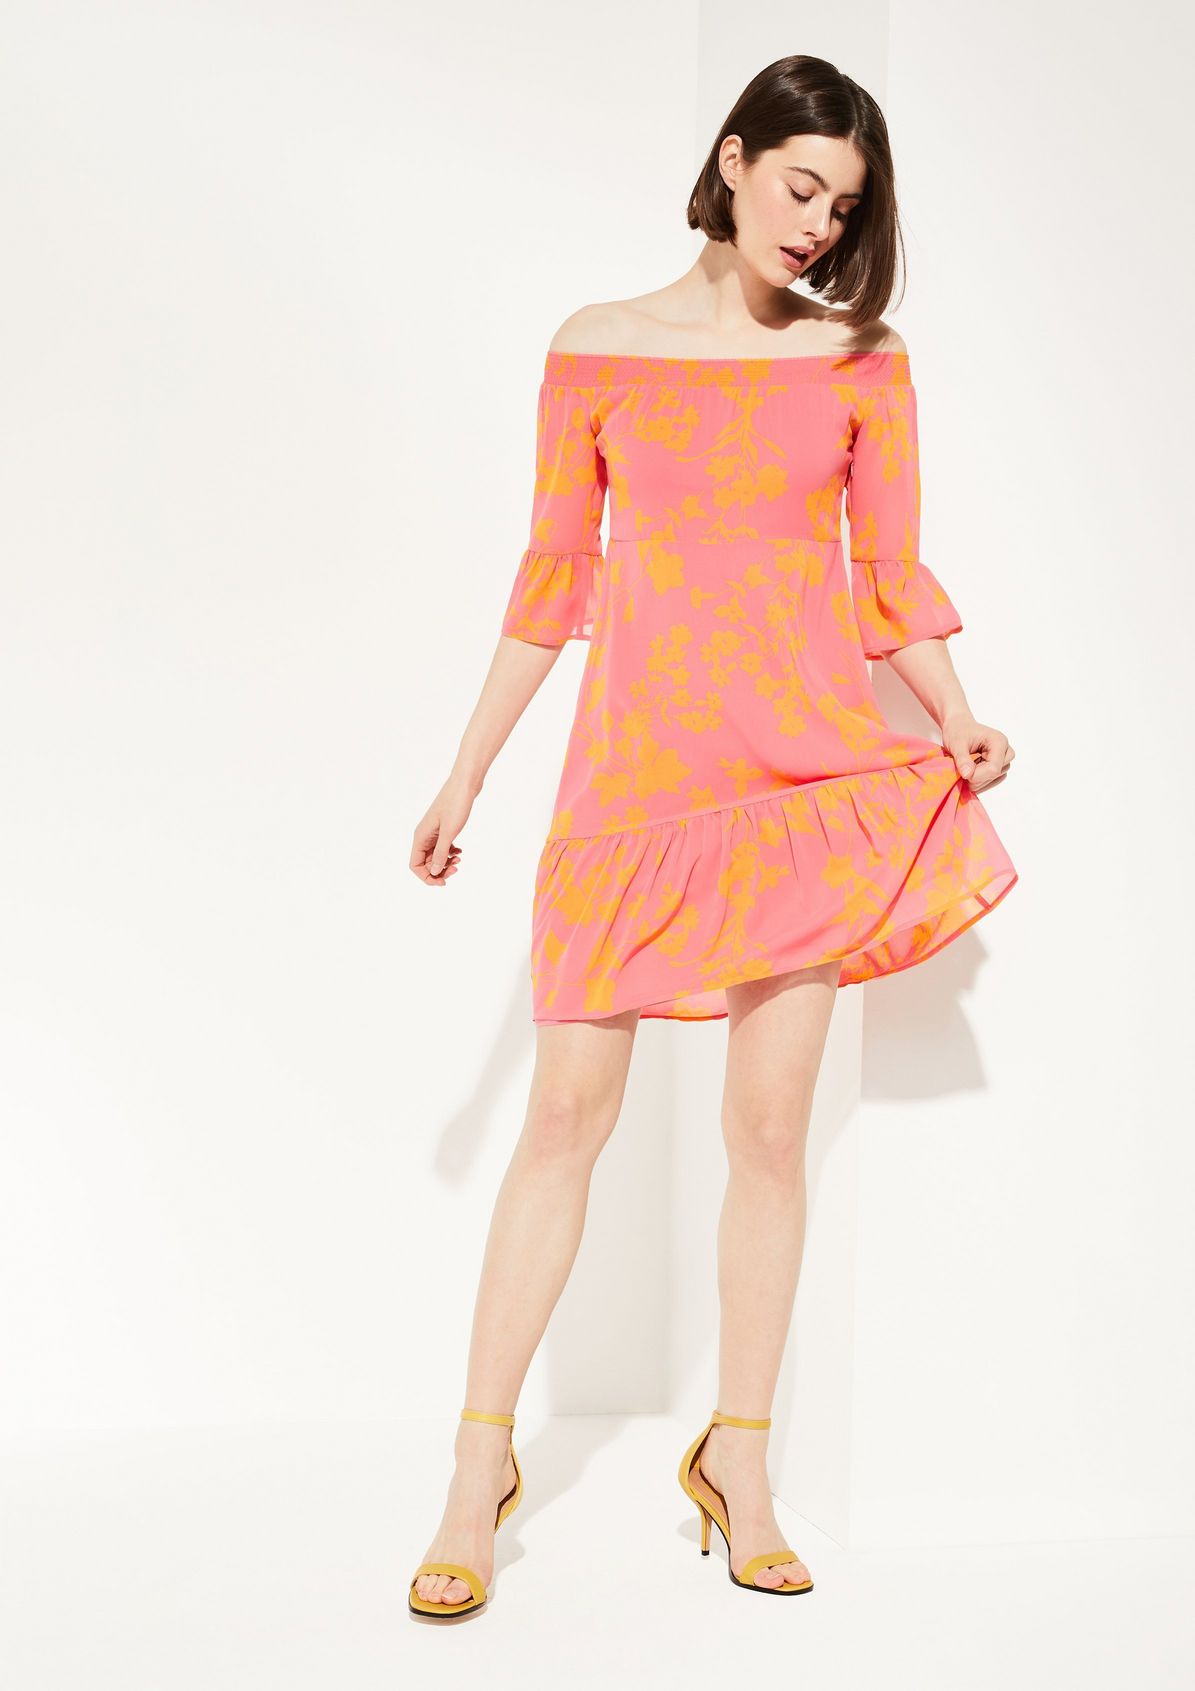 Flowing chiffon dress from comma